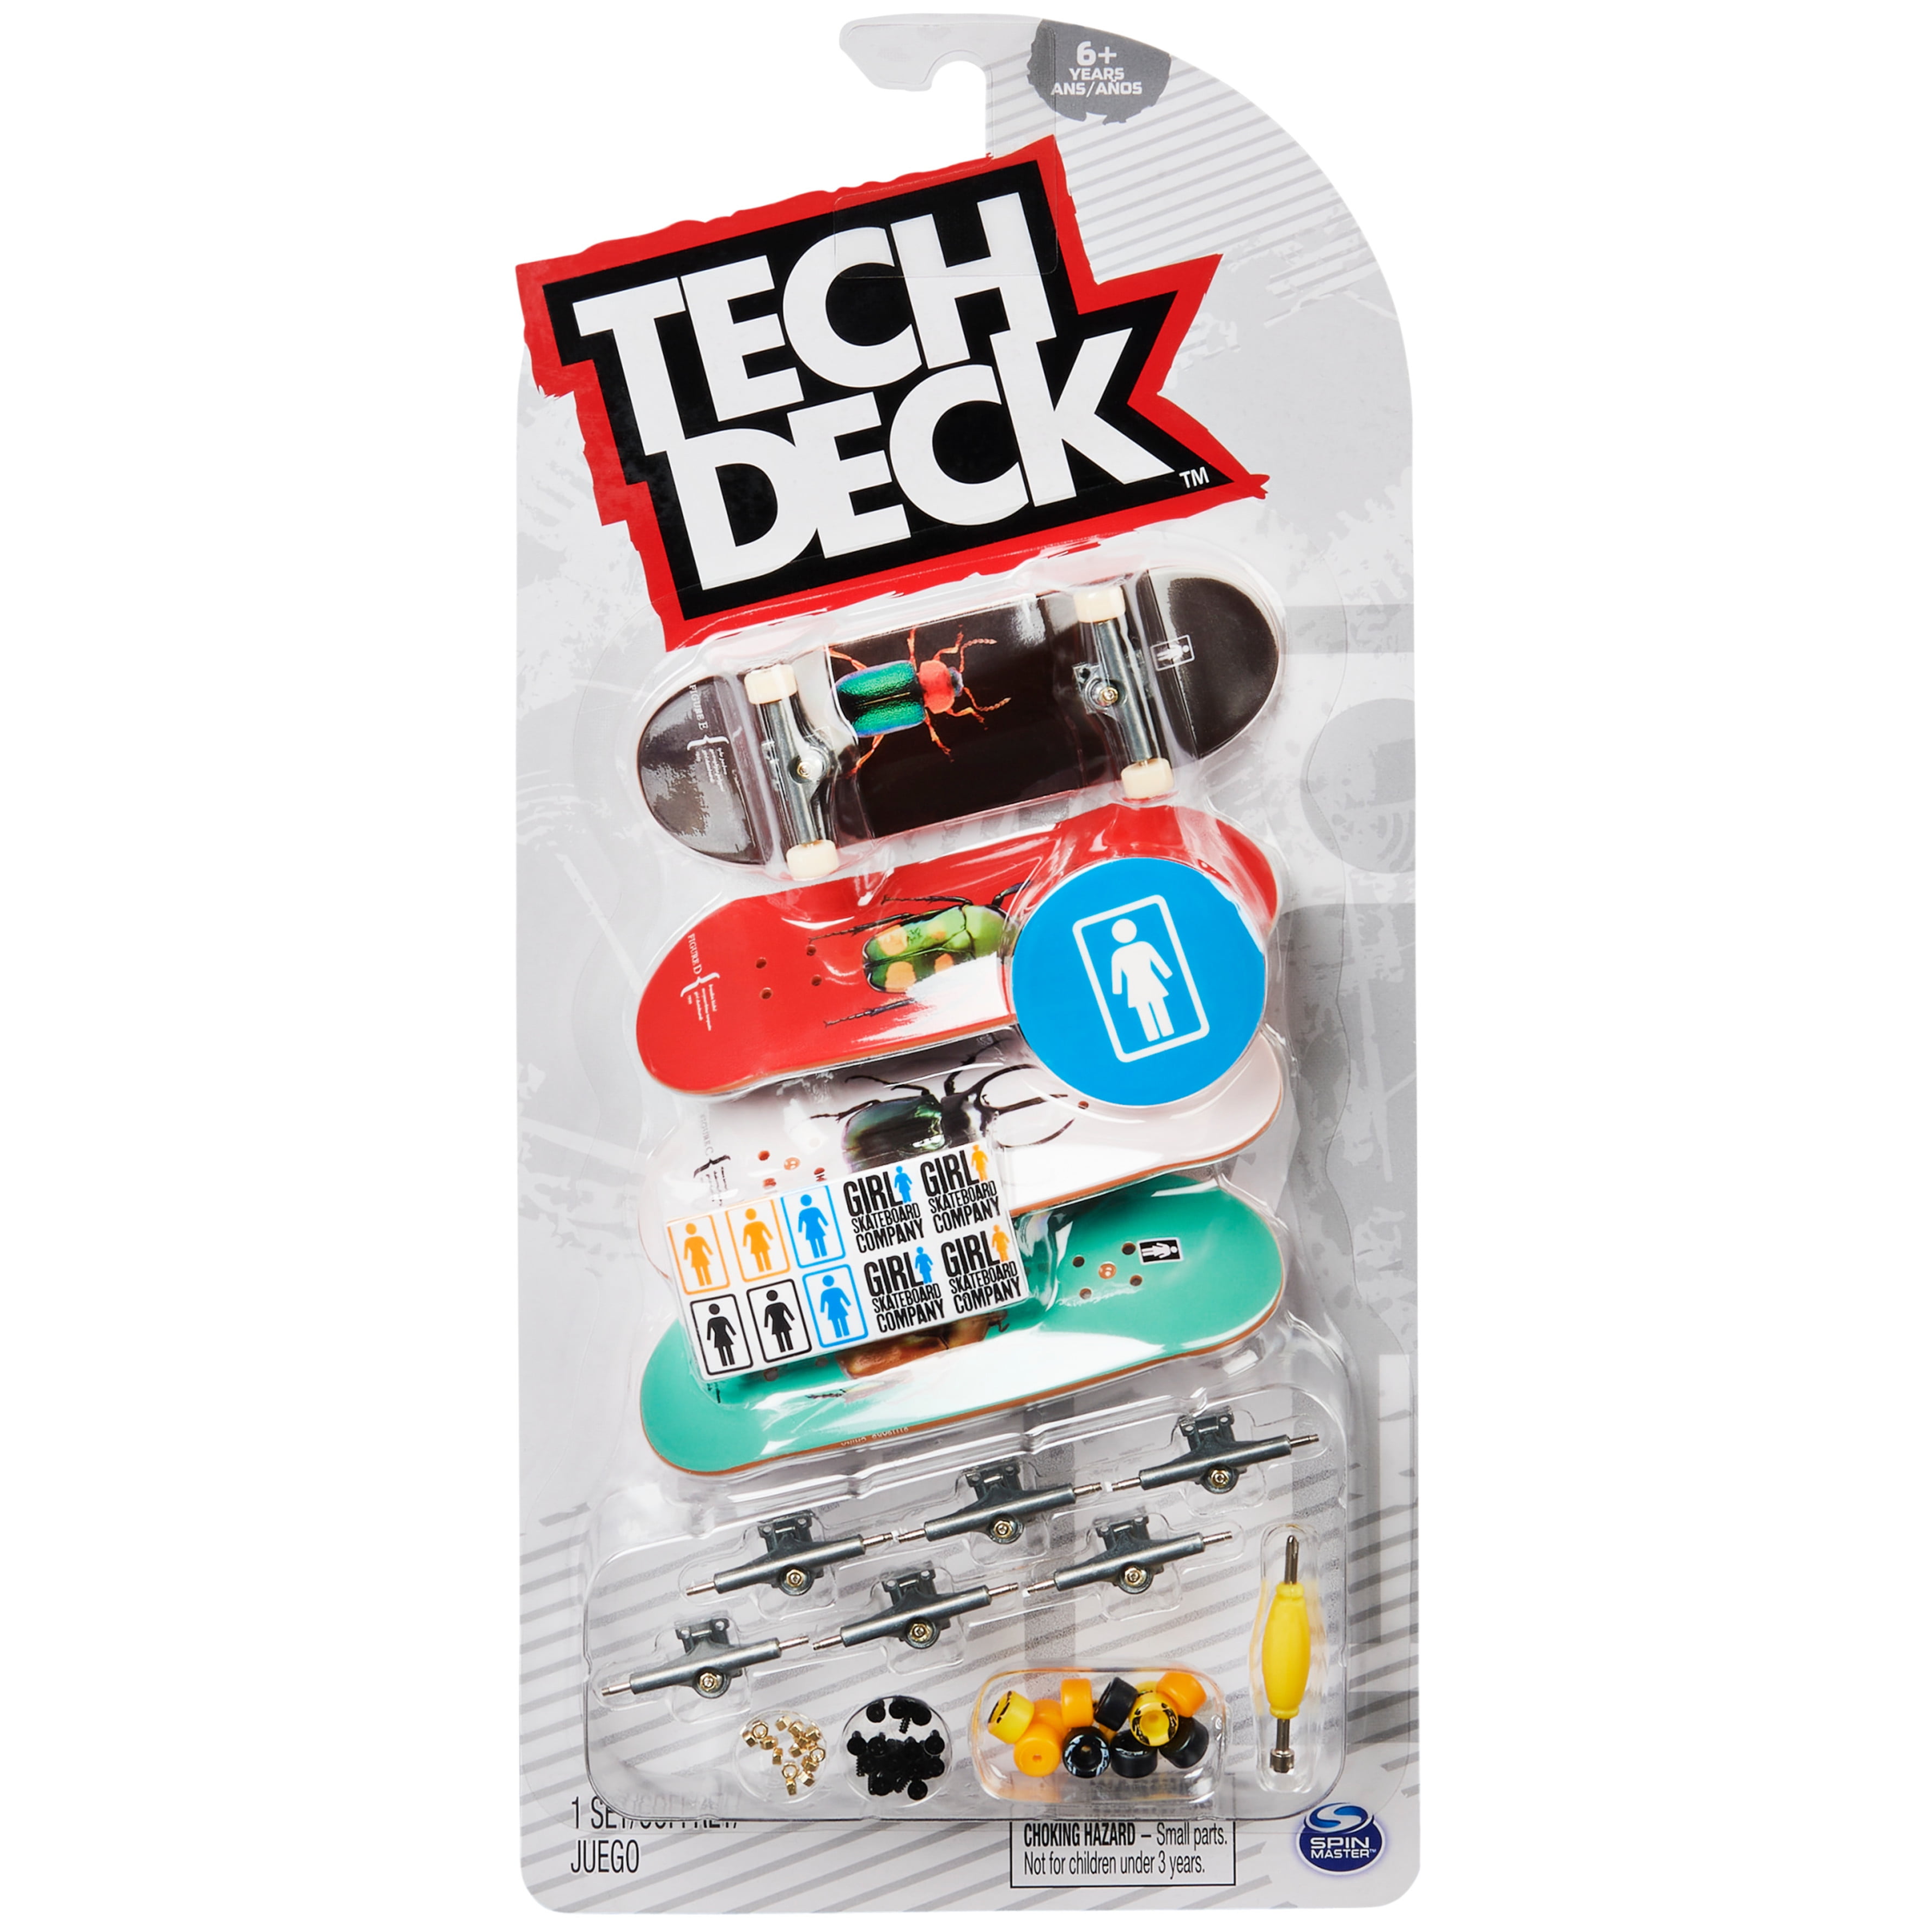 Details about   TECH DECK World Edition REAL KROOKED Skateboards Ultra DLX Fingerboard 4 Pack 